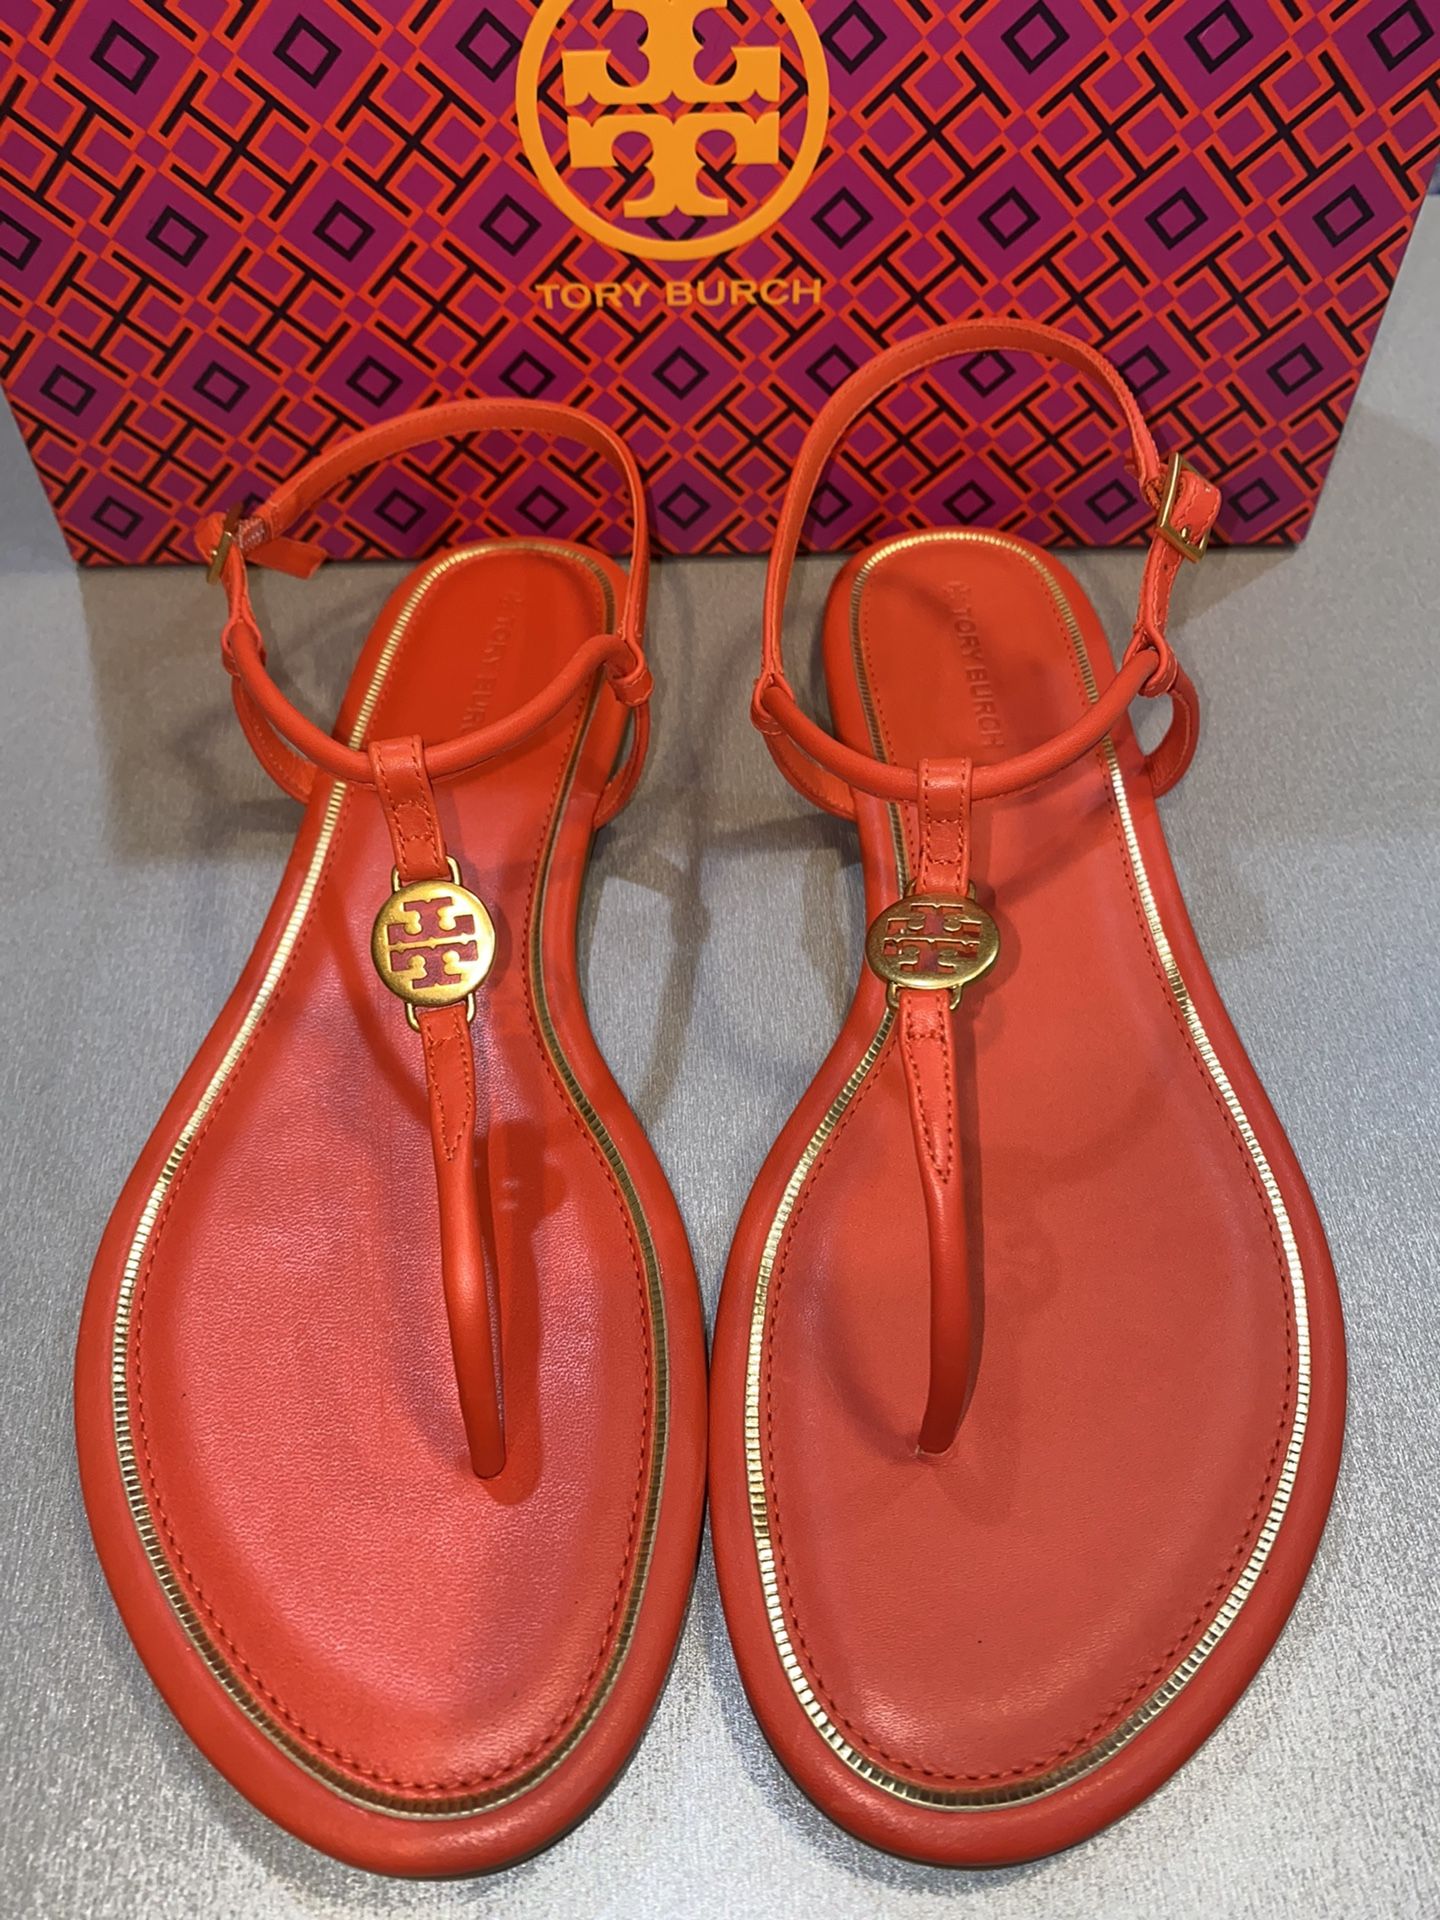 Women's Size 10 Tory Burch Sandals for Sale in West Palm Beach, FL - OfferUp